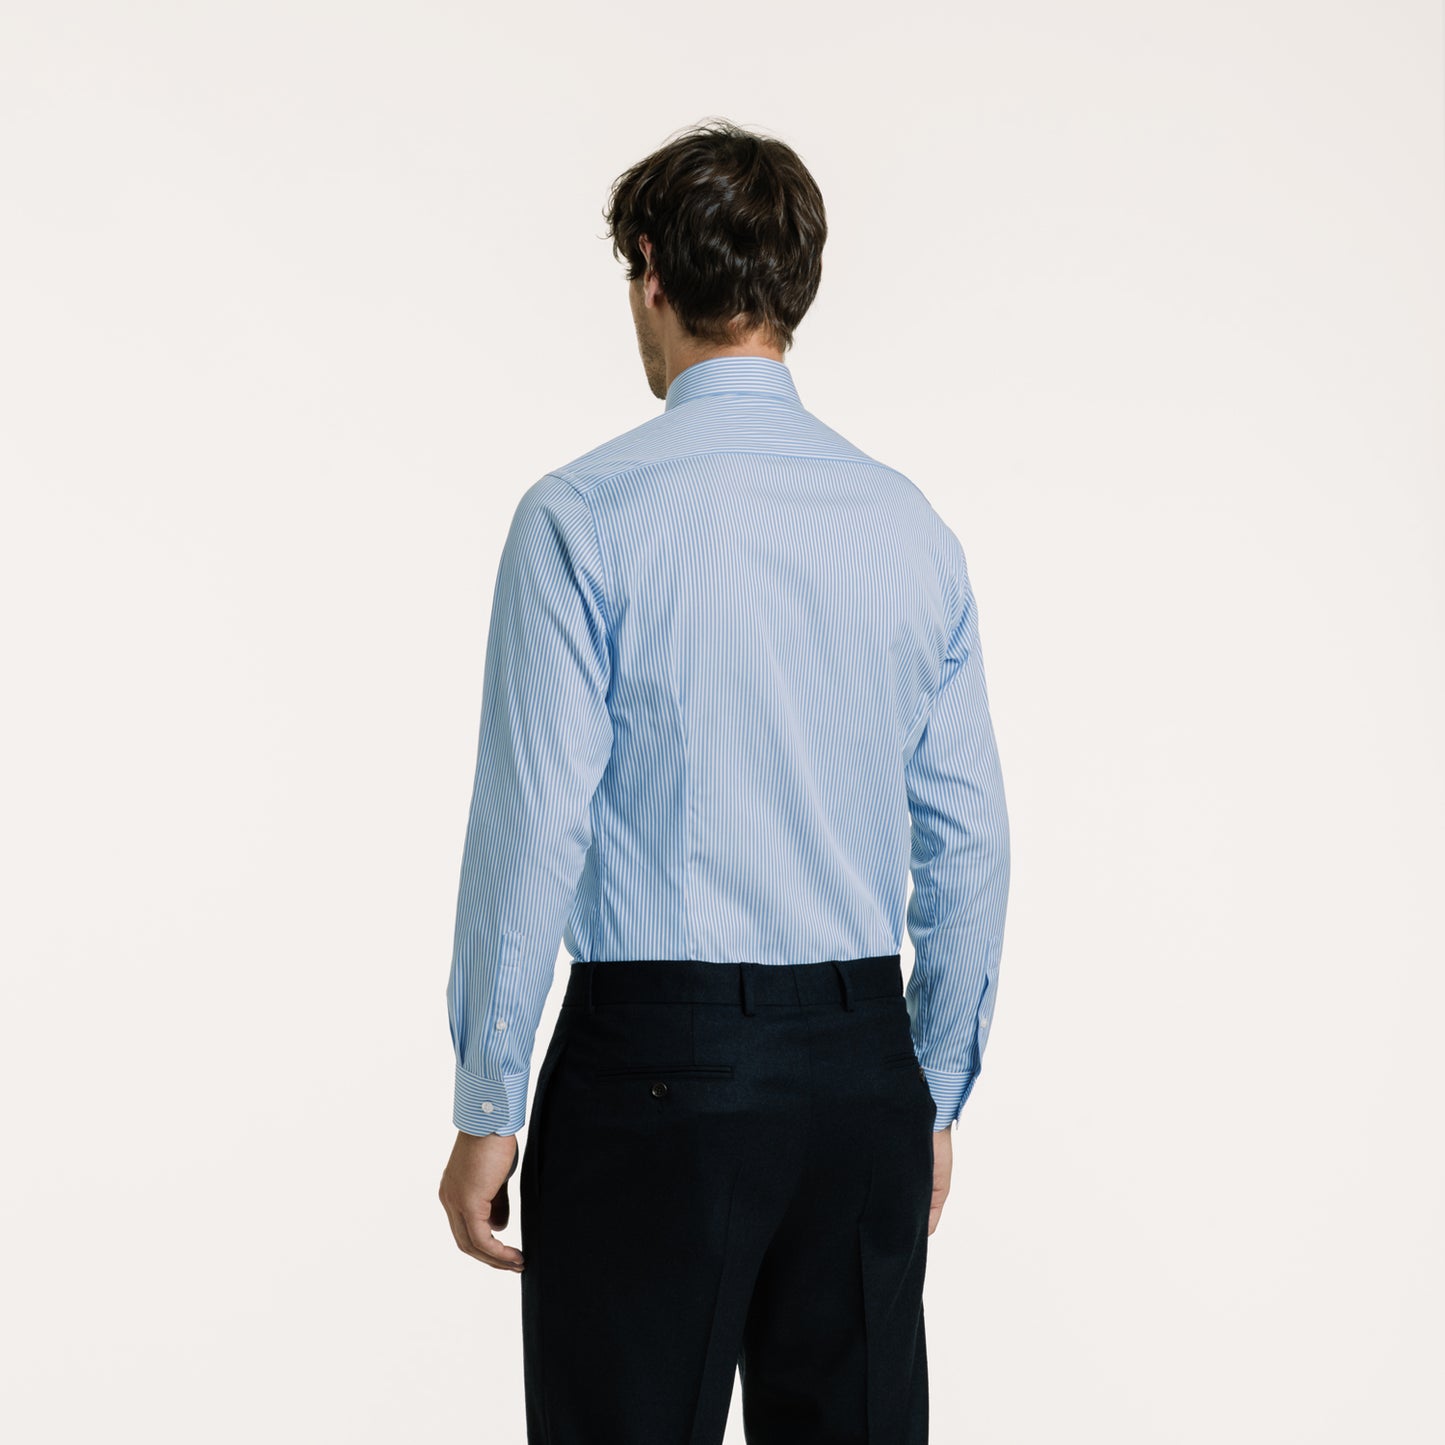 Fitted shirt in double-twisted poplin with blue stripes